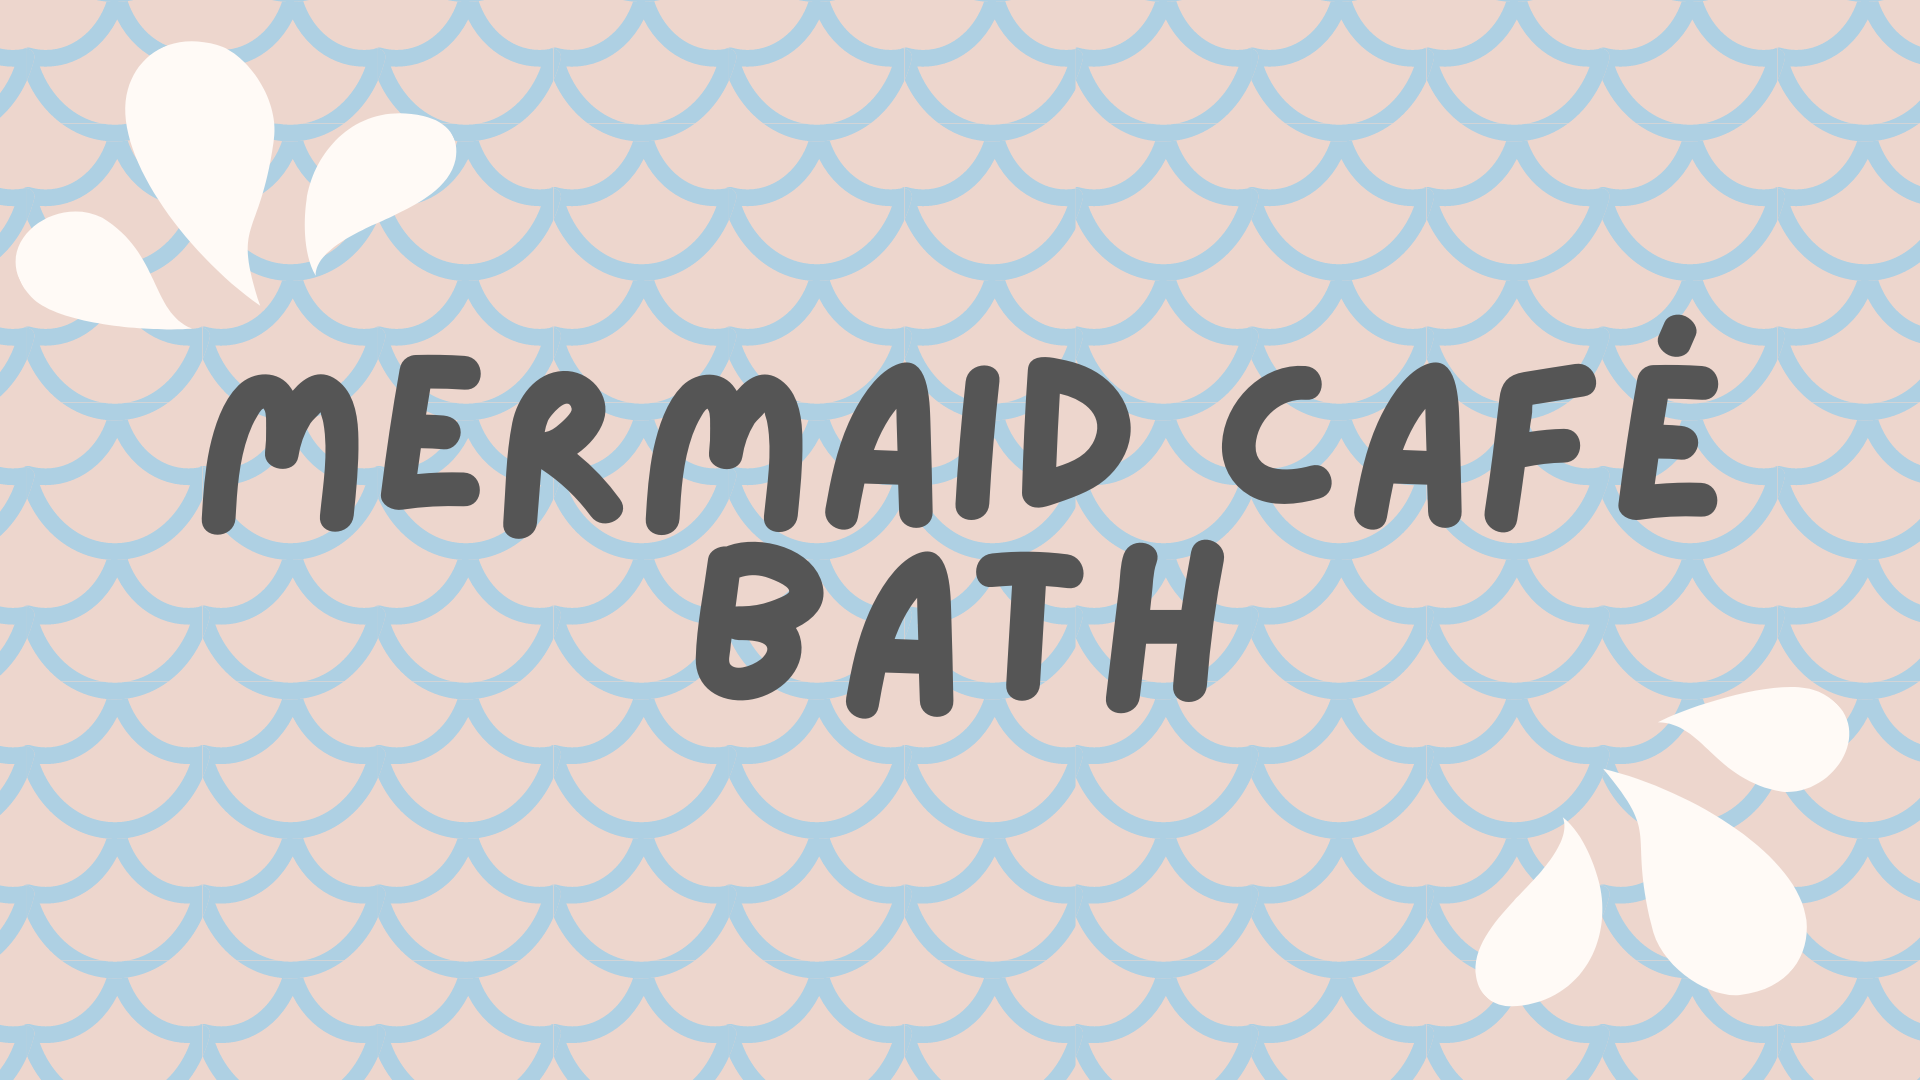 mermaid cafe bath over scale pattern